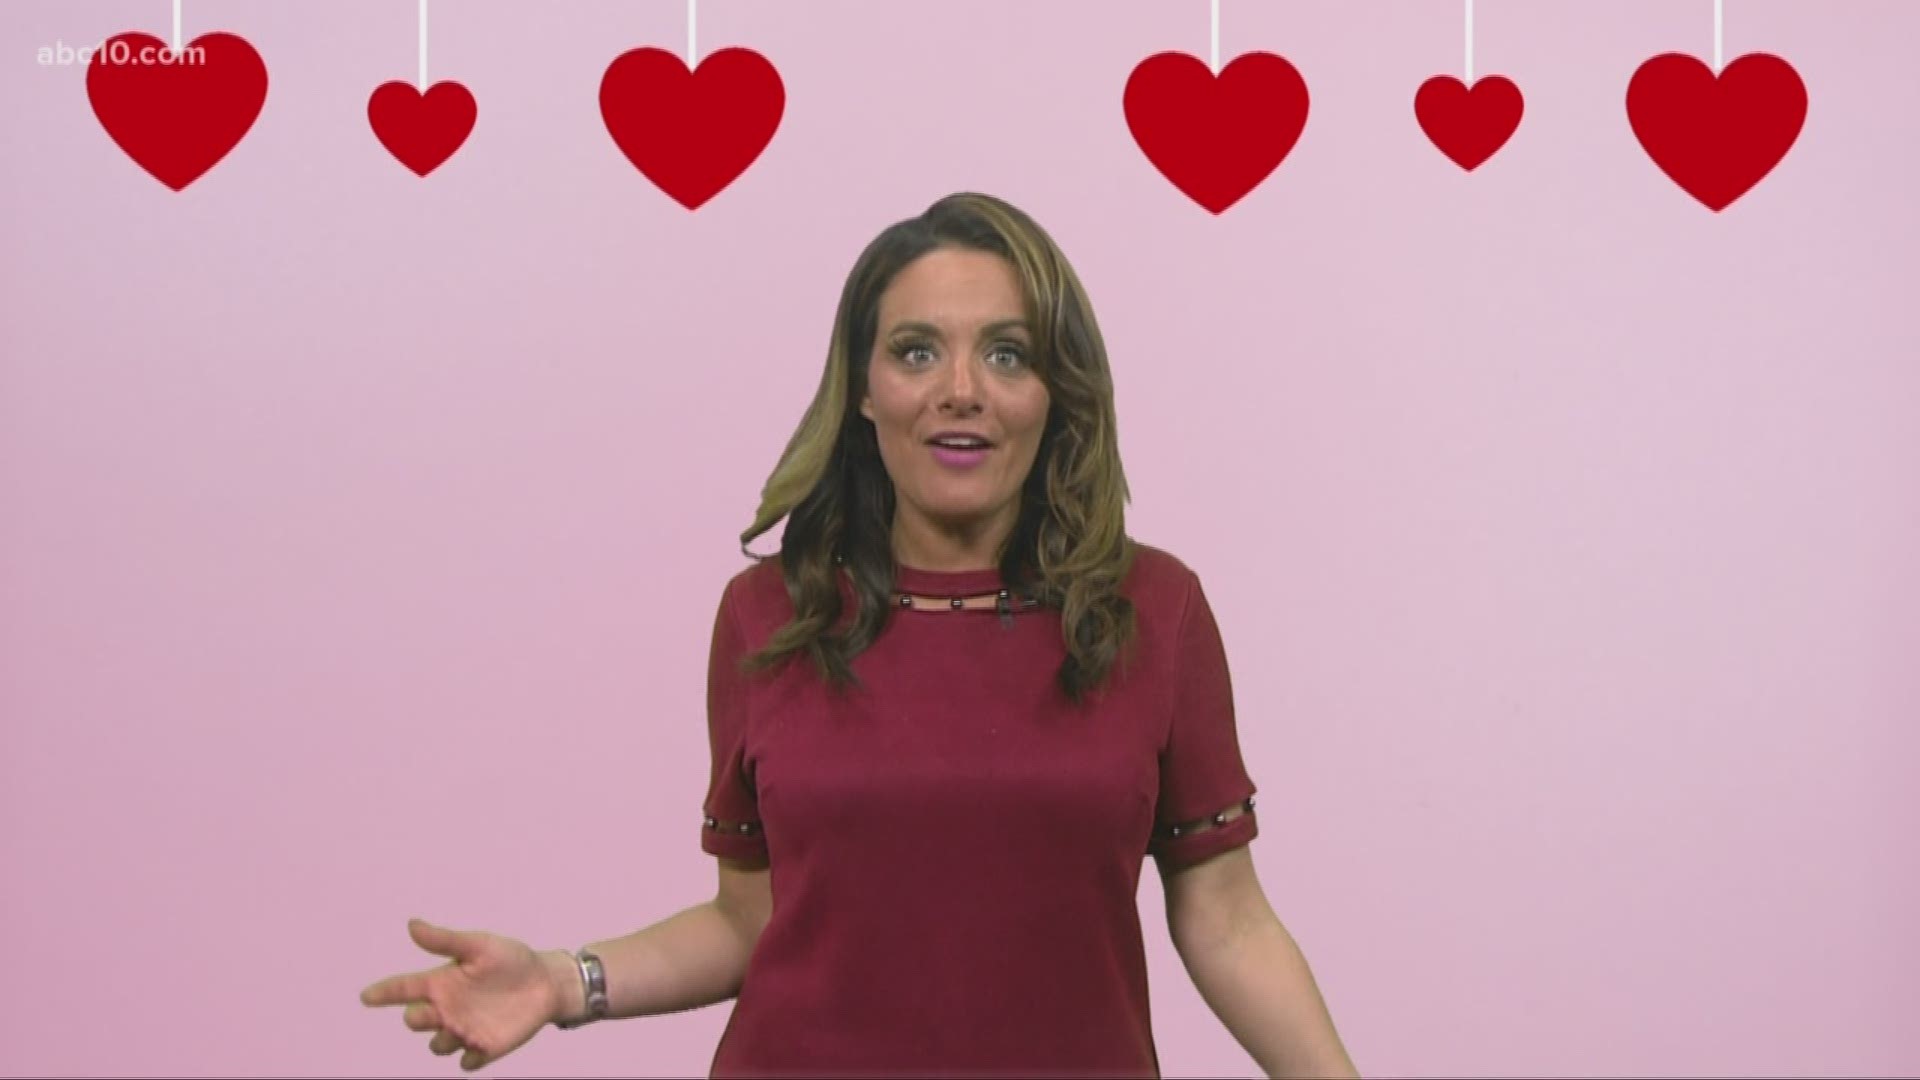 Looking to save money this Valentine's Day? Brittany breaks down where you can save a buck or two.